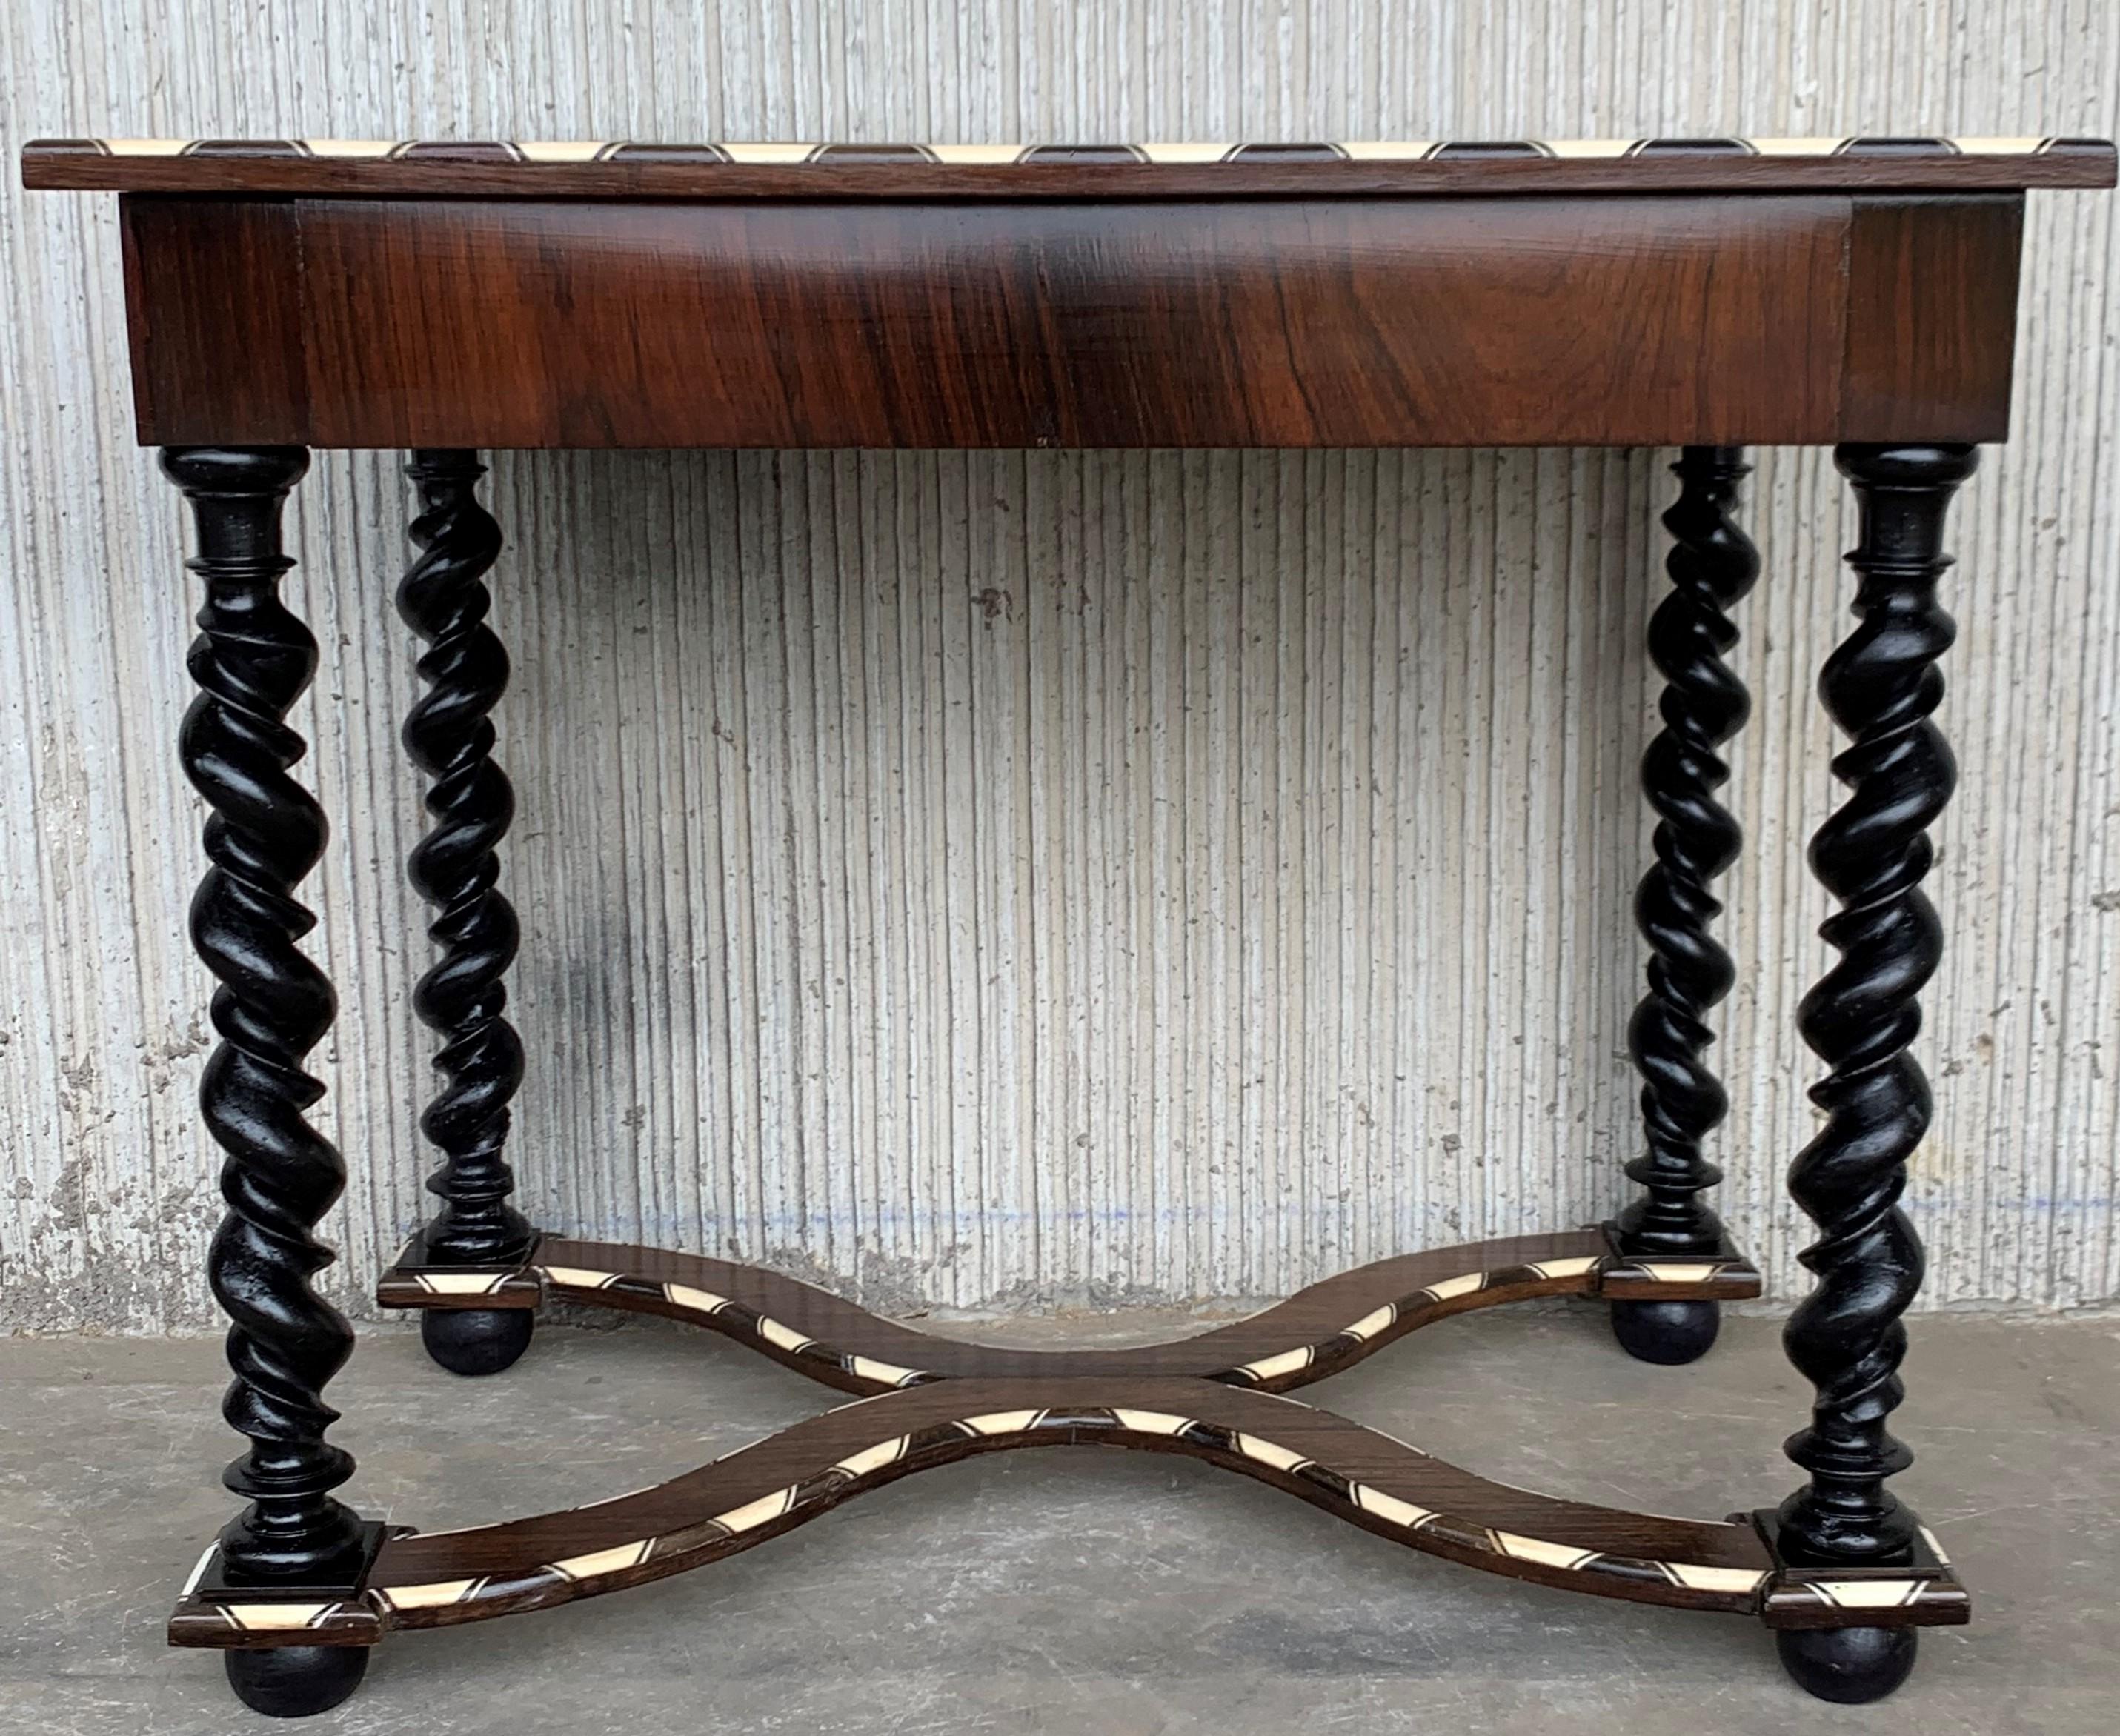 Walnut 18th Century William and Mary Marquetry Side Table with Turned Legs & Stretcher